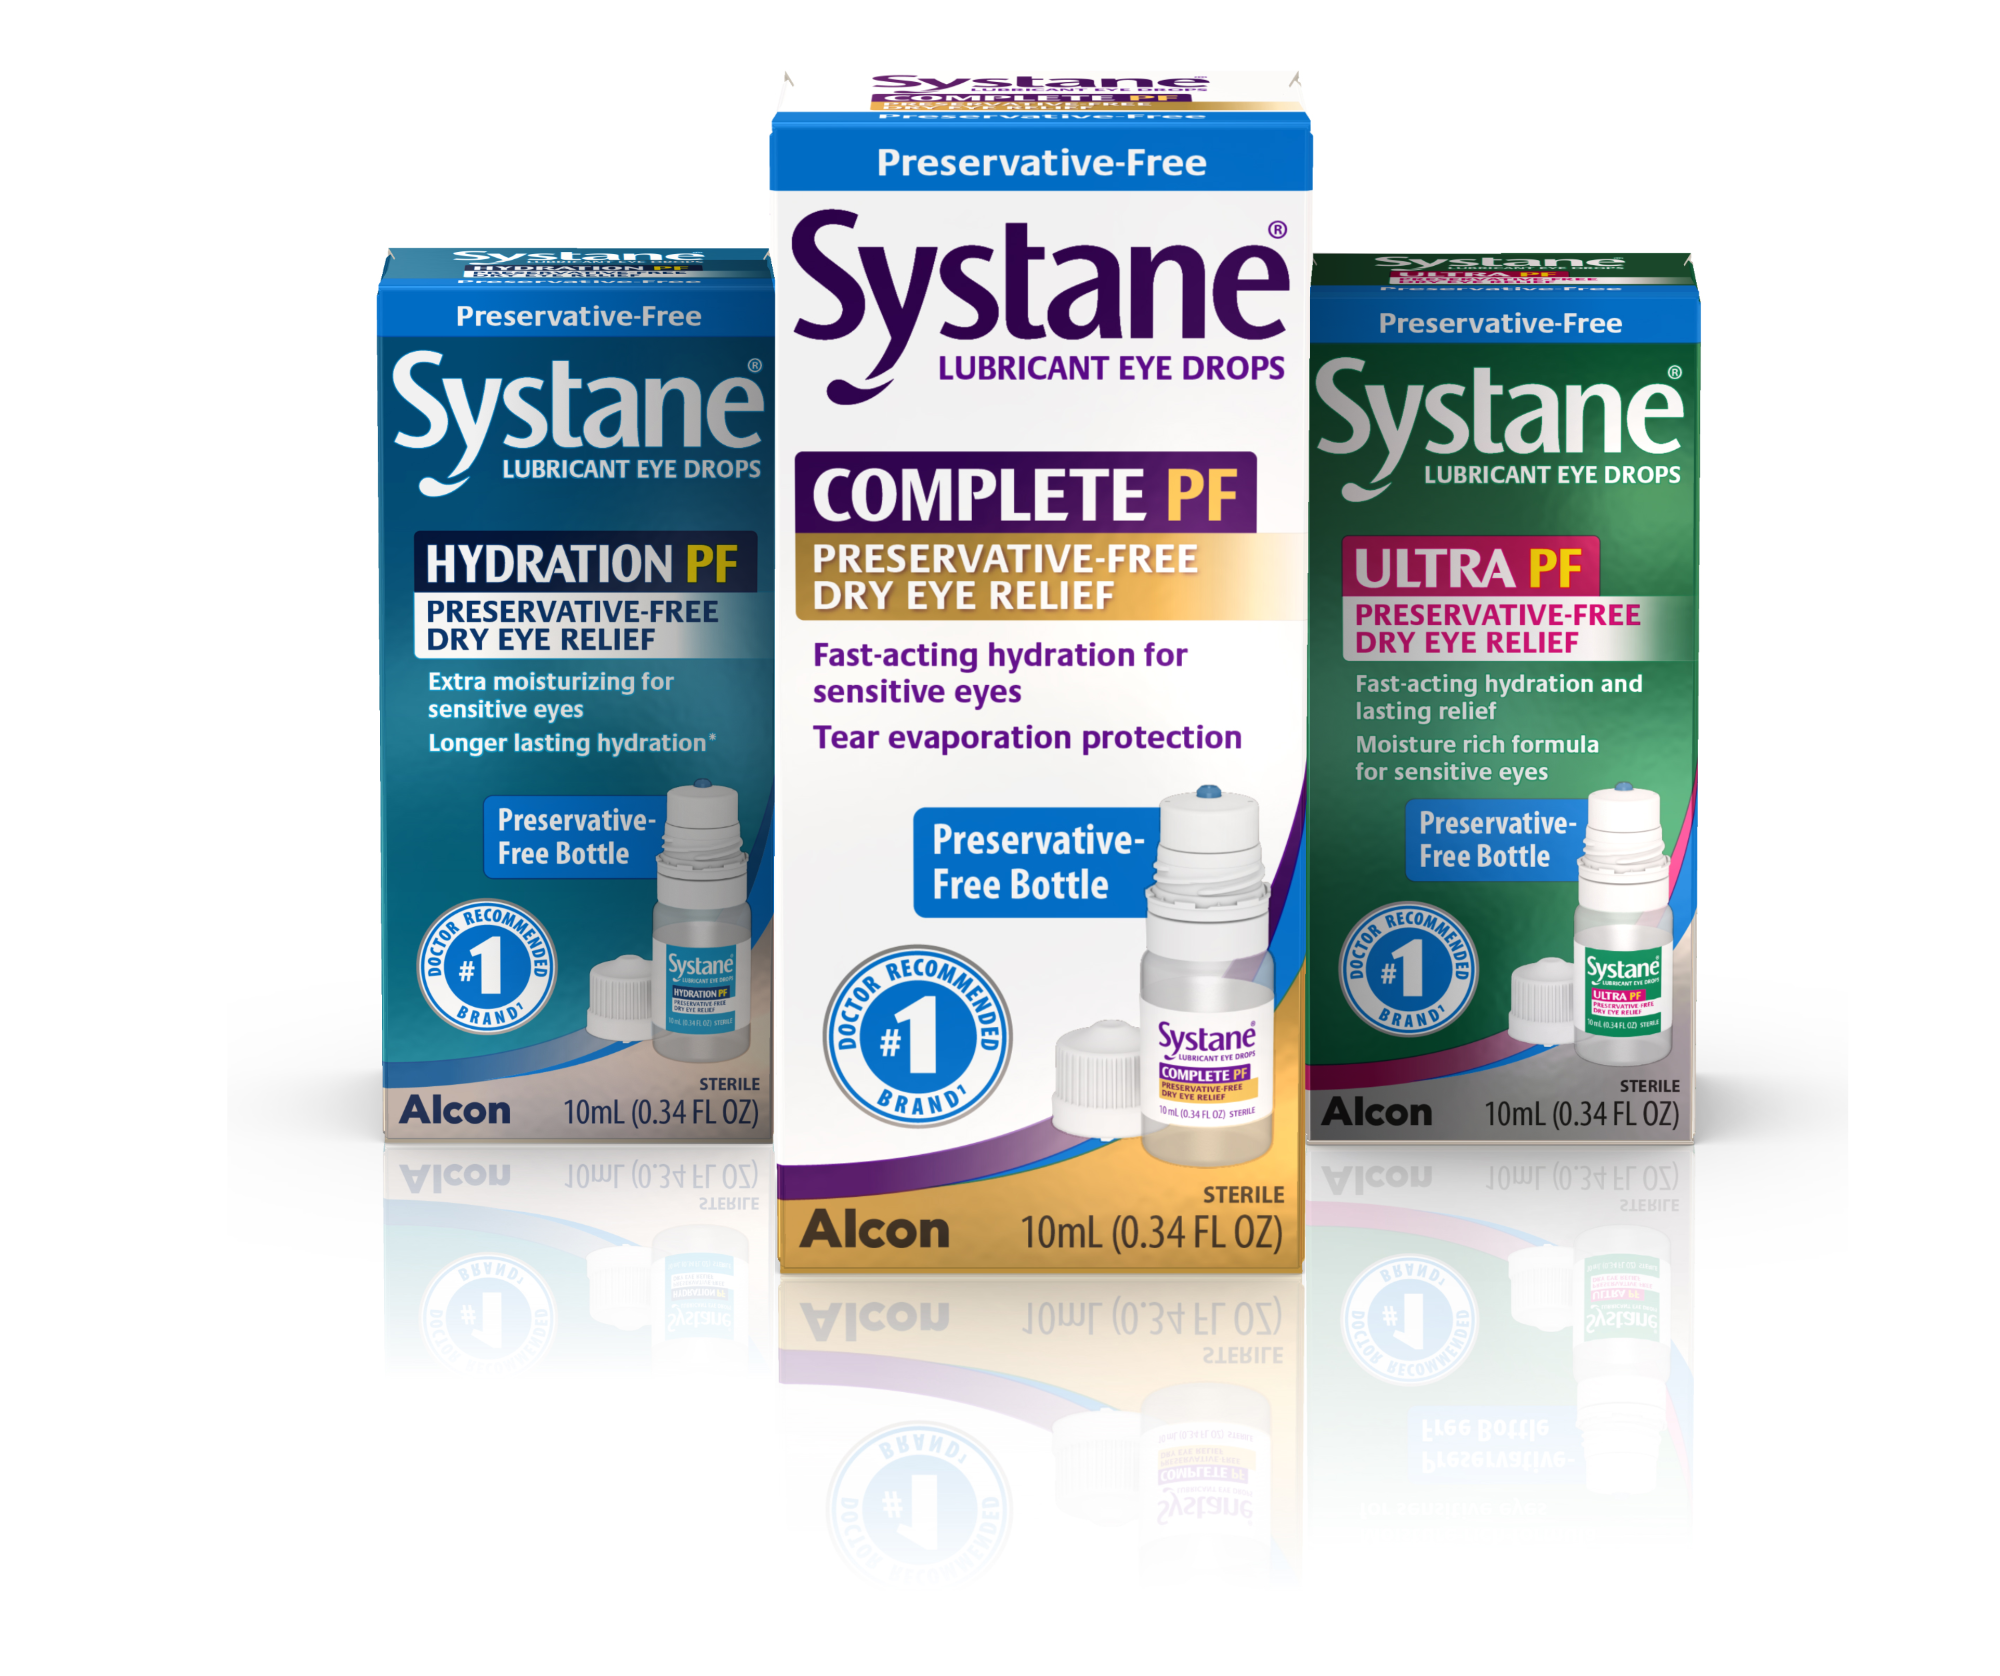 Systane Hydration PF, Systane Complete PF, Systane Ultra